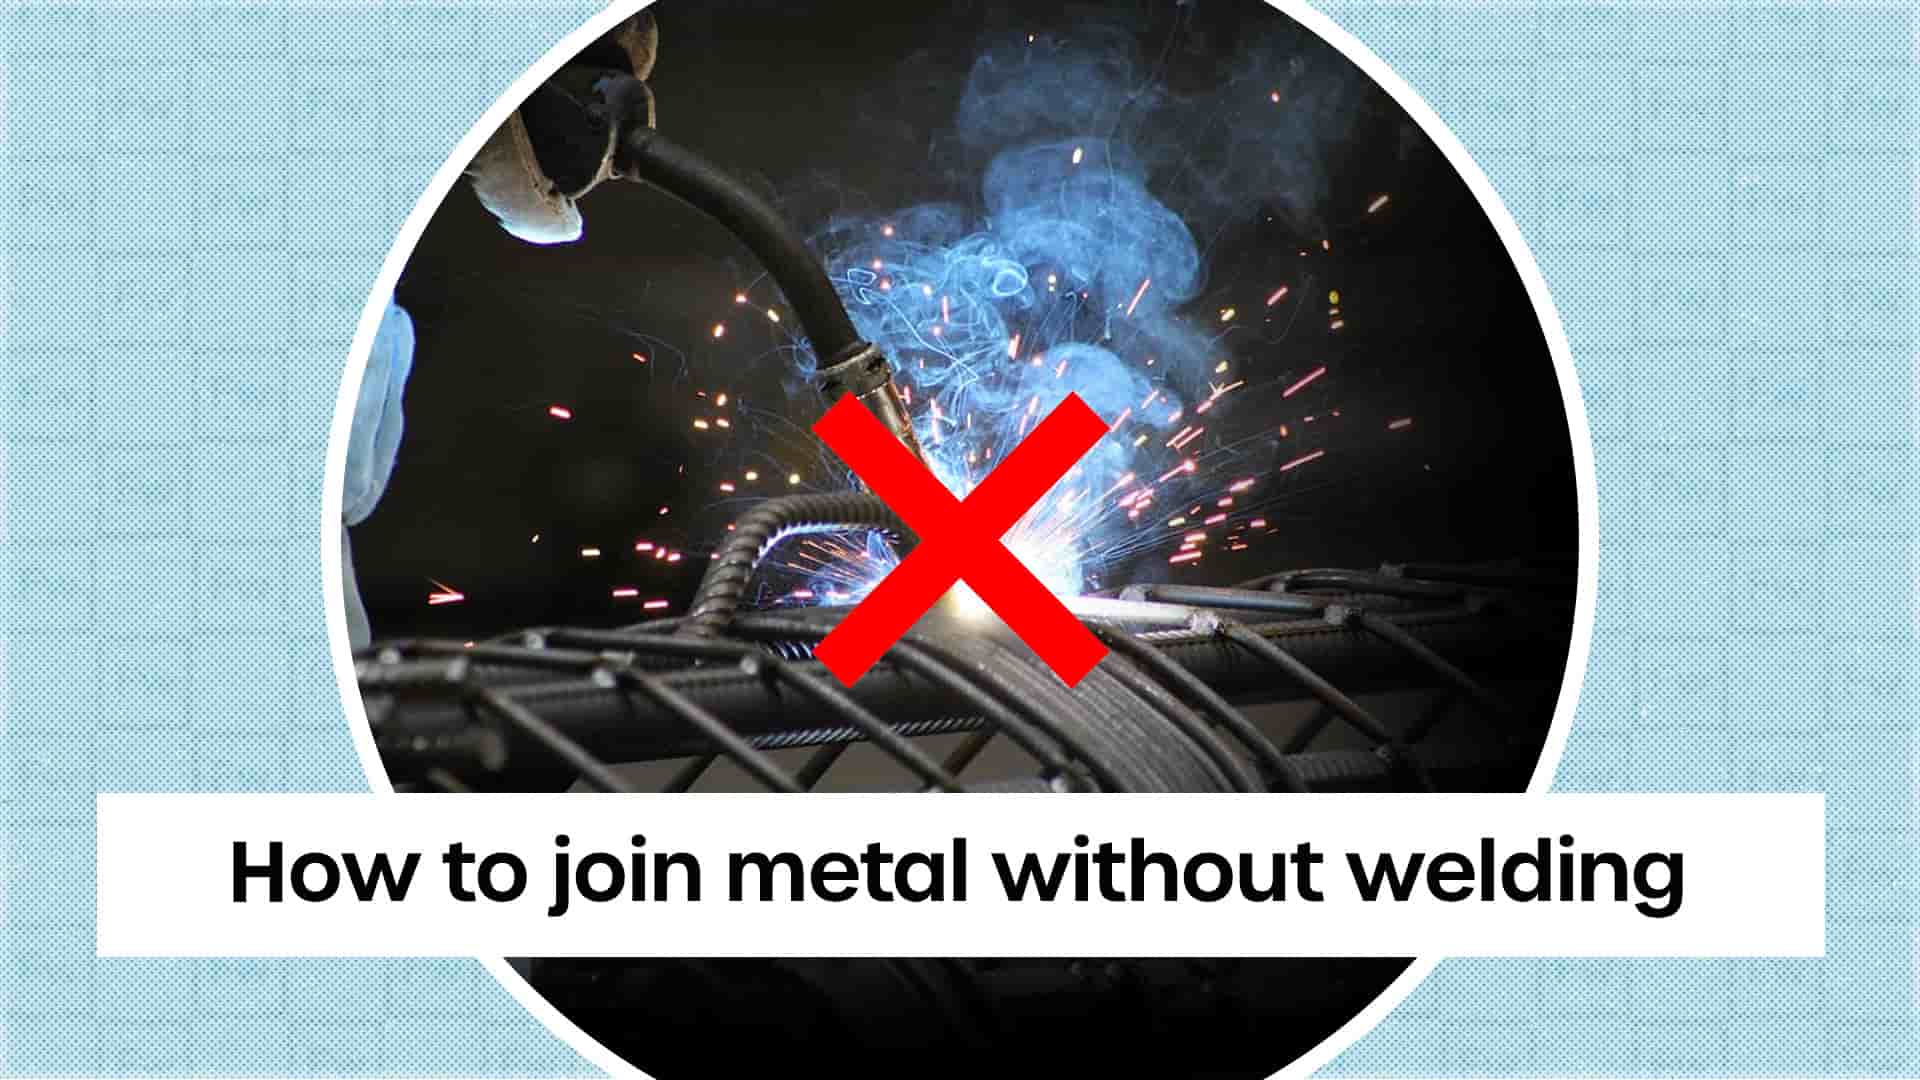 https://forgeway.com/wp-content/uploads/2022/04/Join-Metal-Without-Welding.jpg